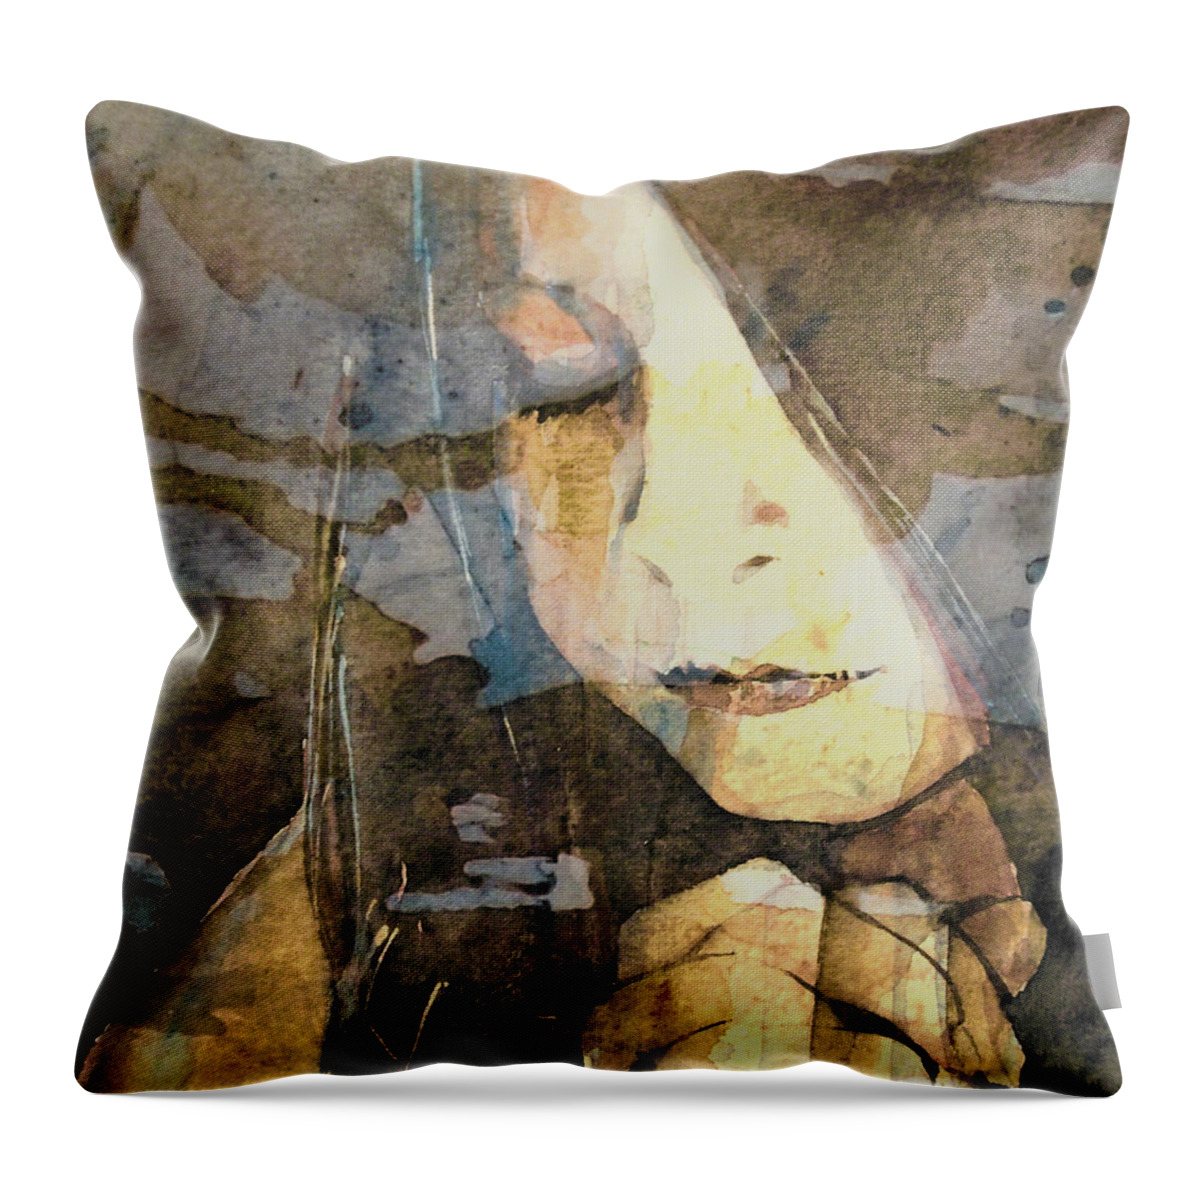 Prayer Throw Pillow featuring the painting I Say A Little Prayer by Paul Lovering